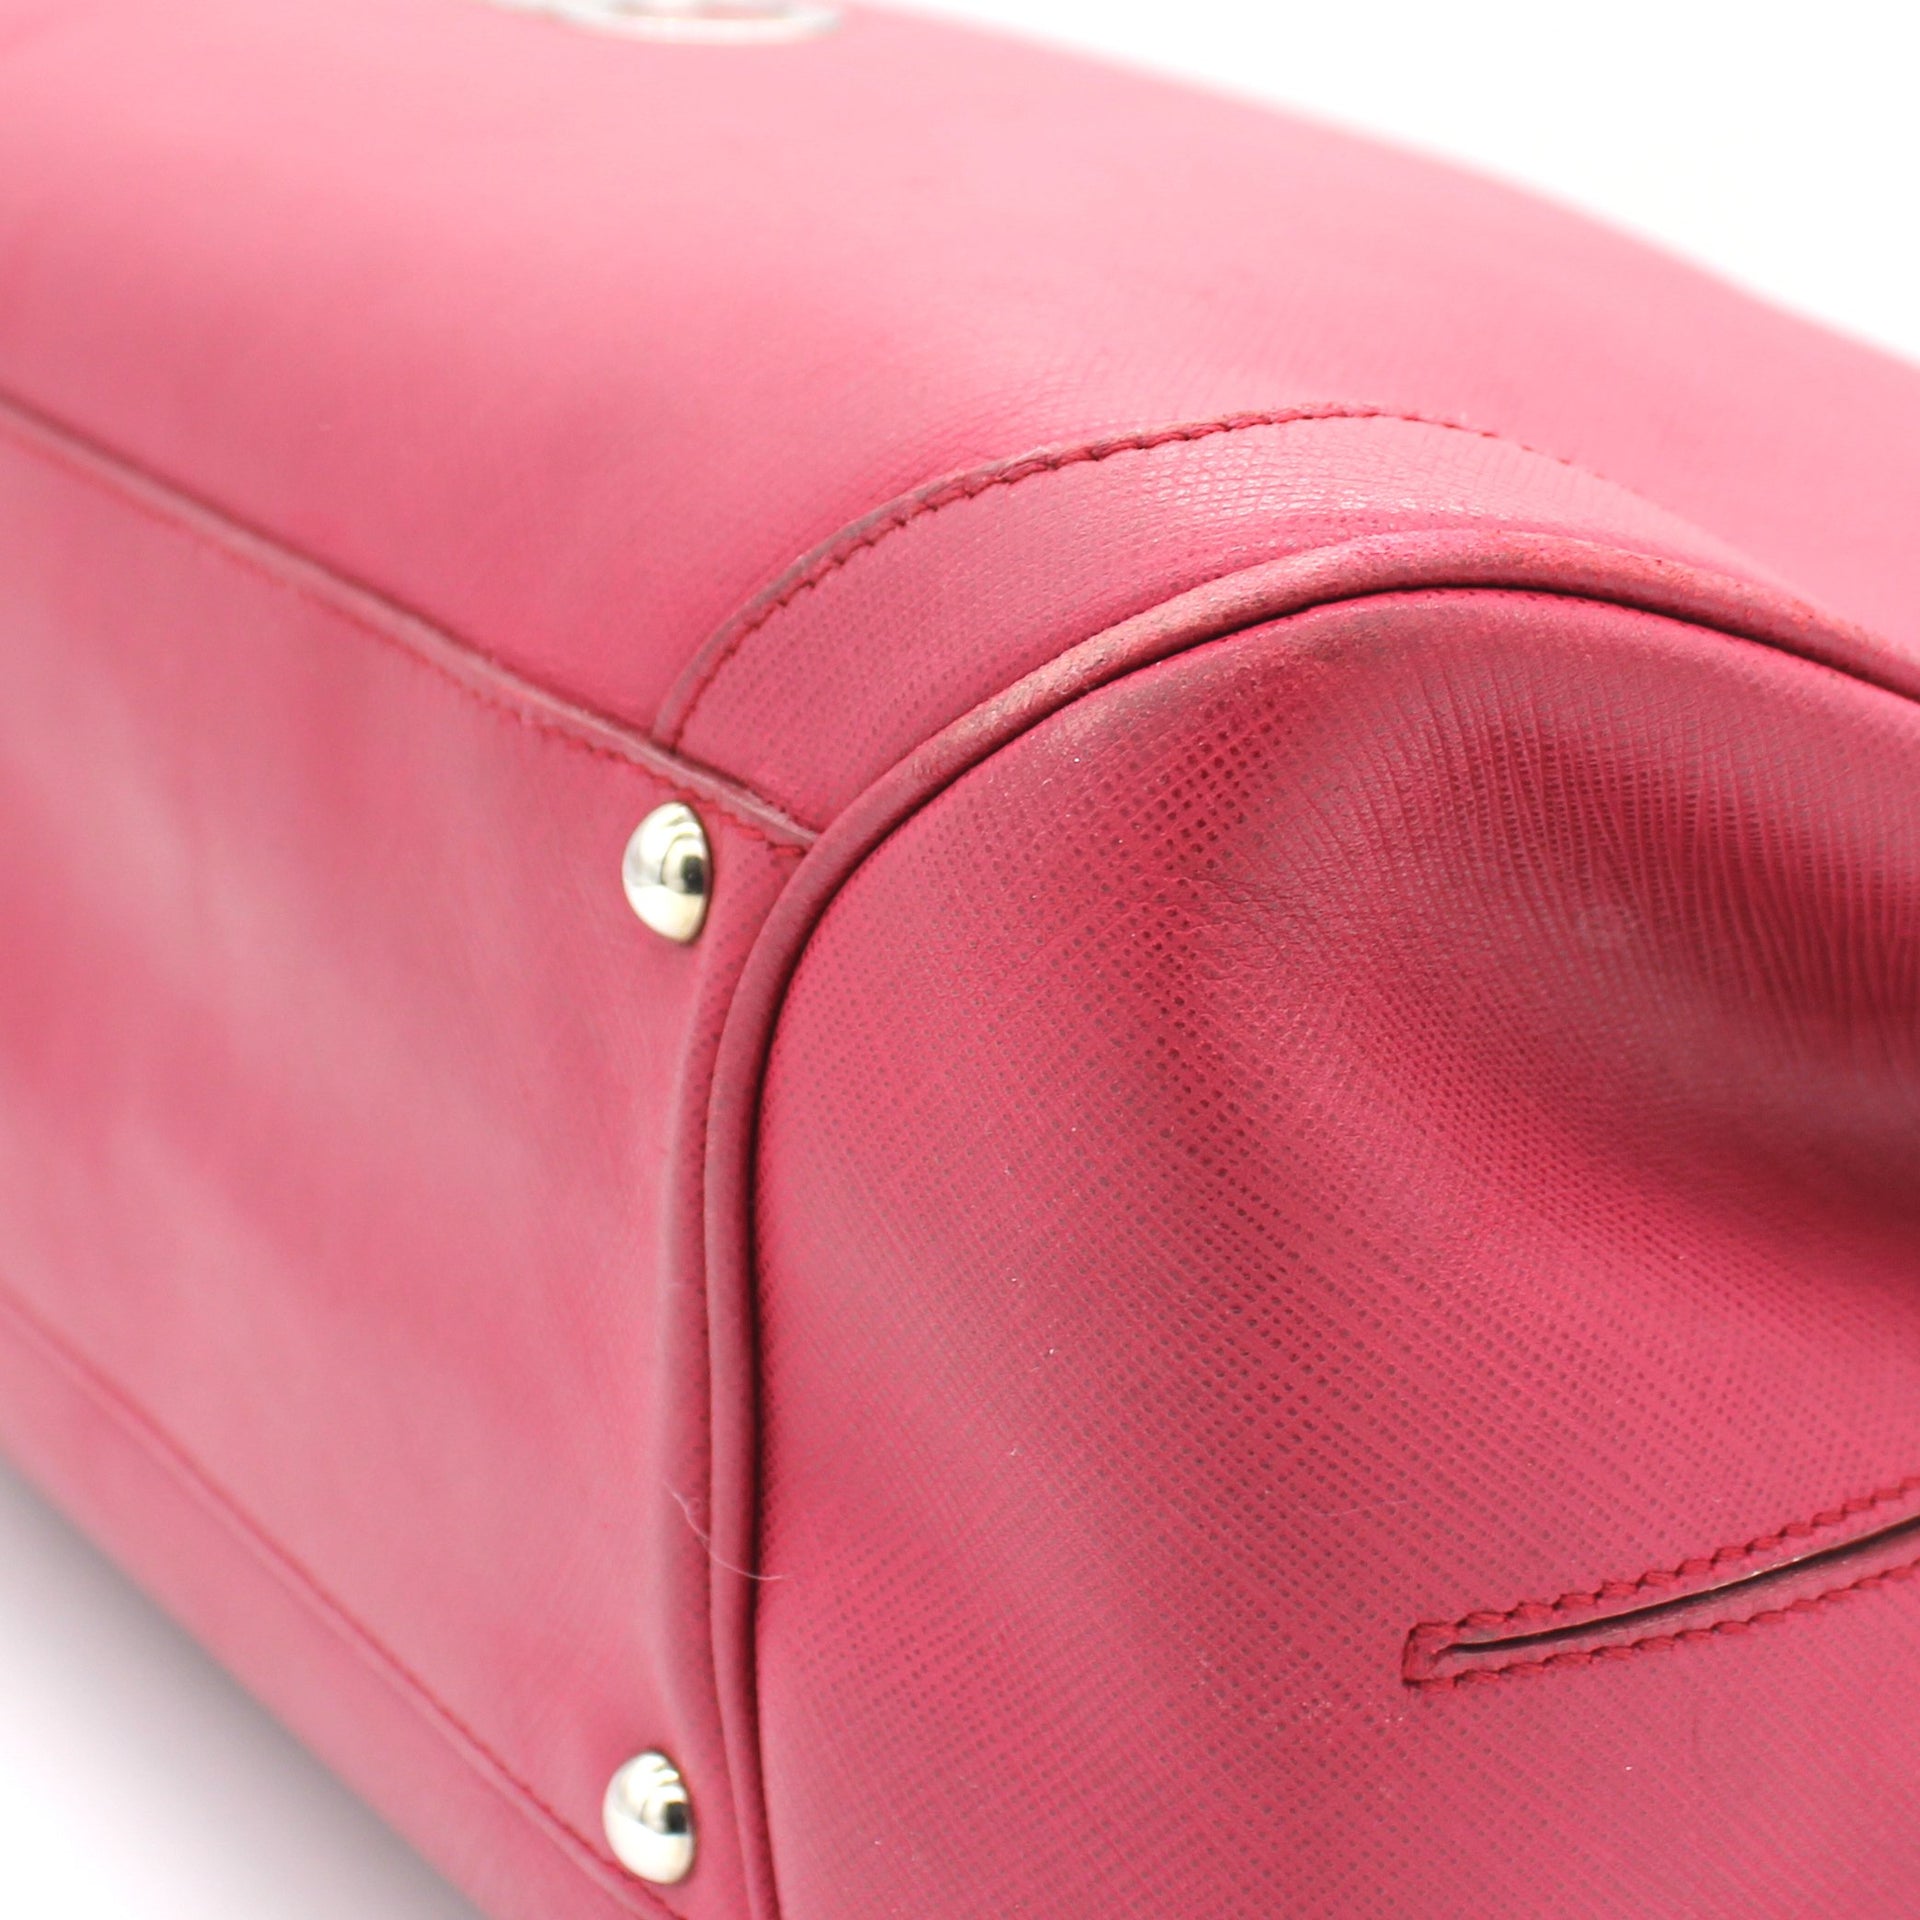 Pink Leather Tote